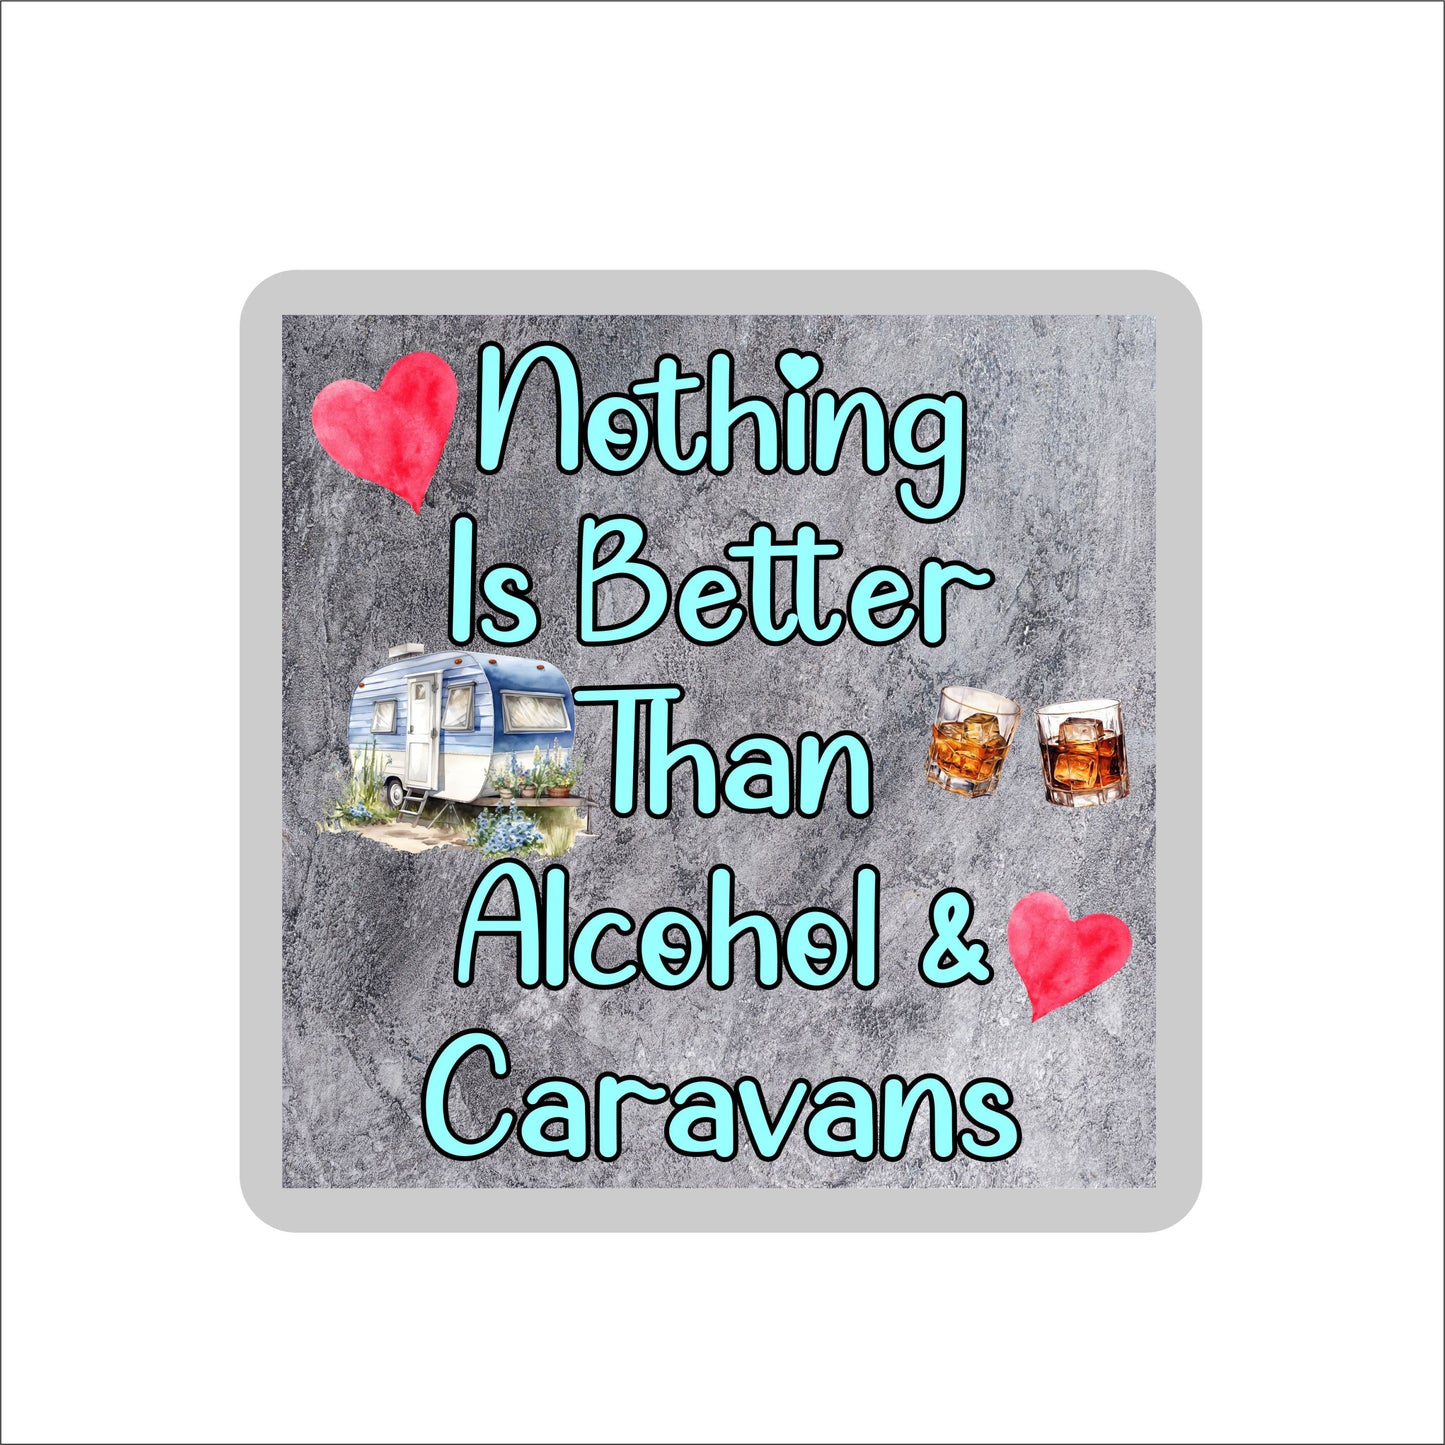 Caravan Coaster Gift - Nothing Is Better Than Alcohol And Caravans - Cute Fun Novelty Birthday Present